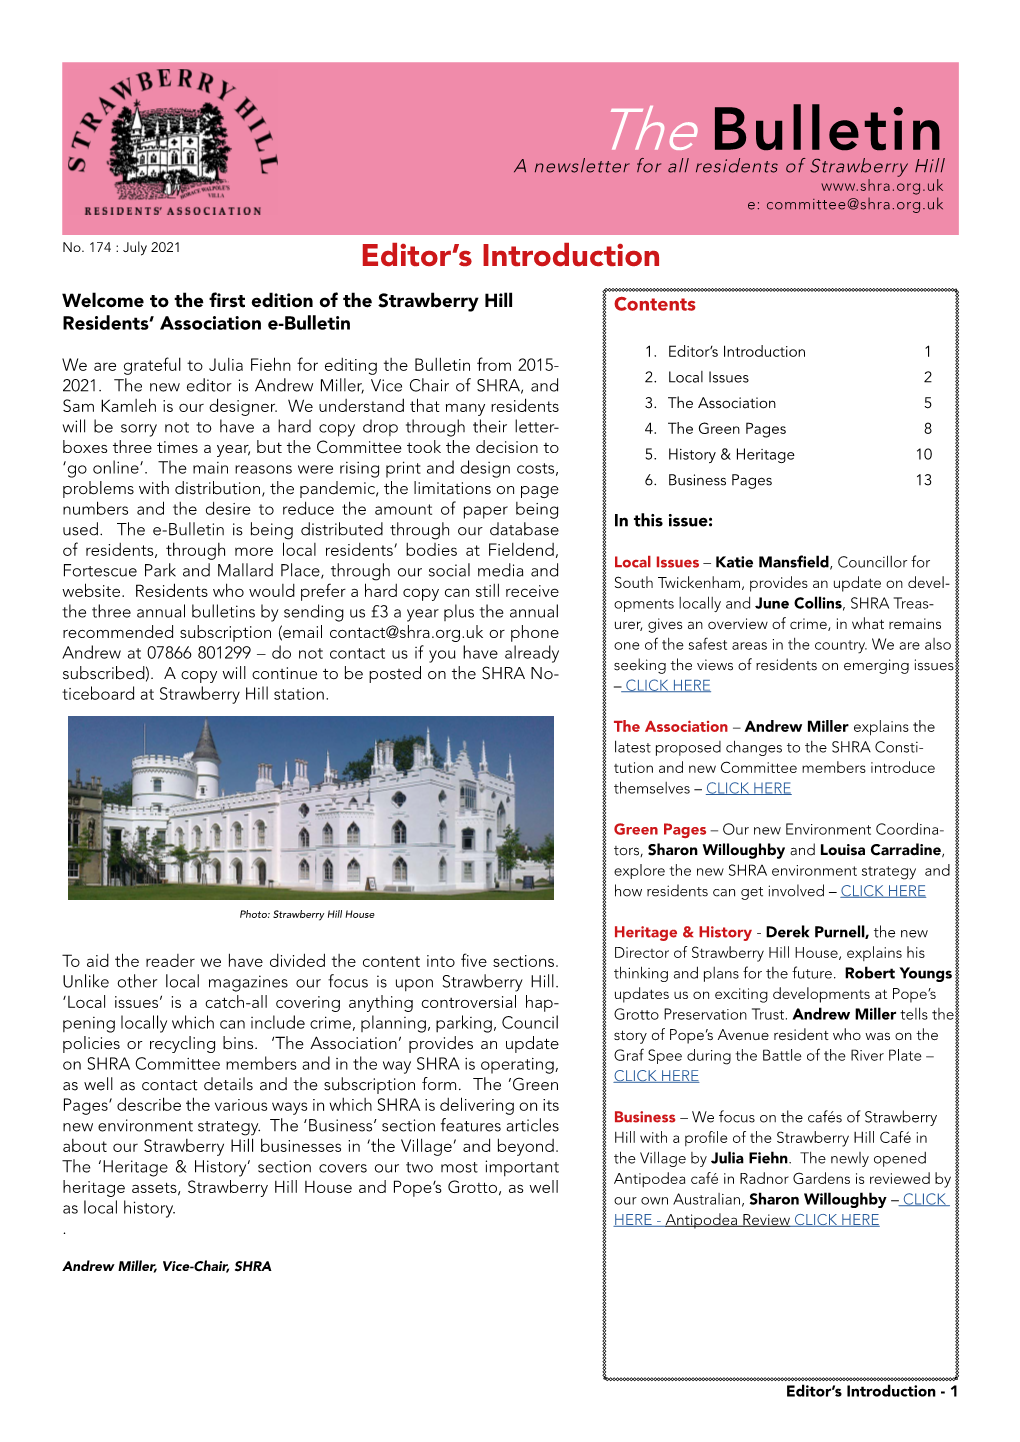 The Bulletin from 2015- 2021